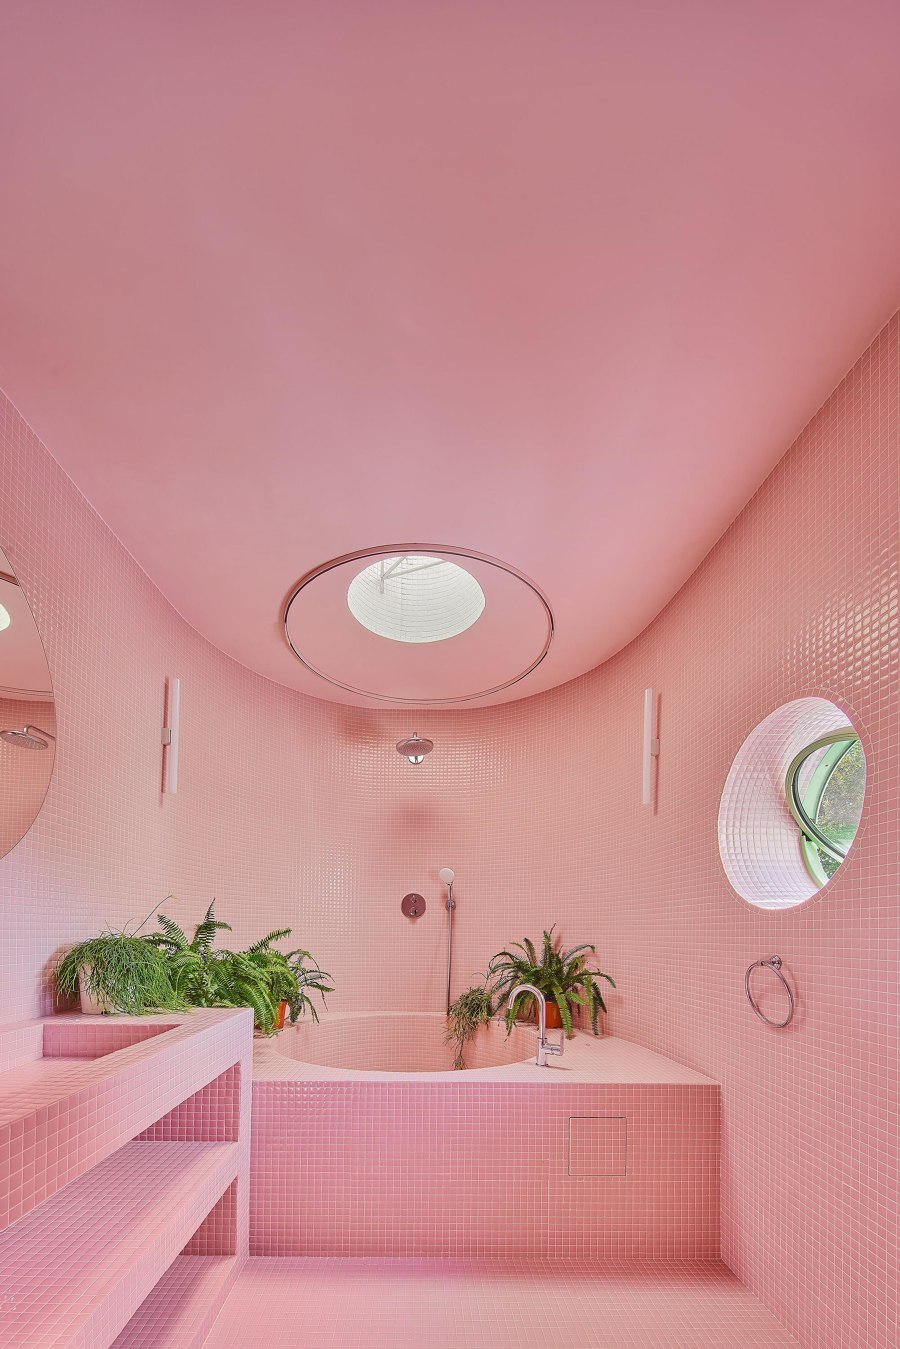 Playful bathrooms from around the world that break the mould | News